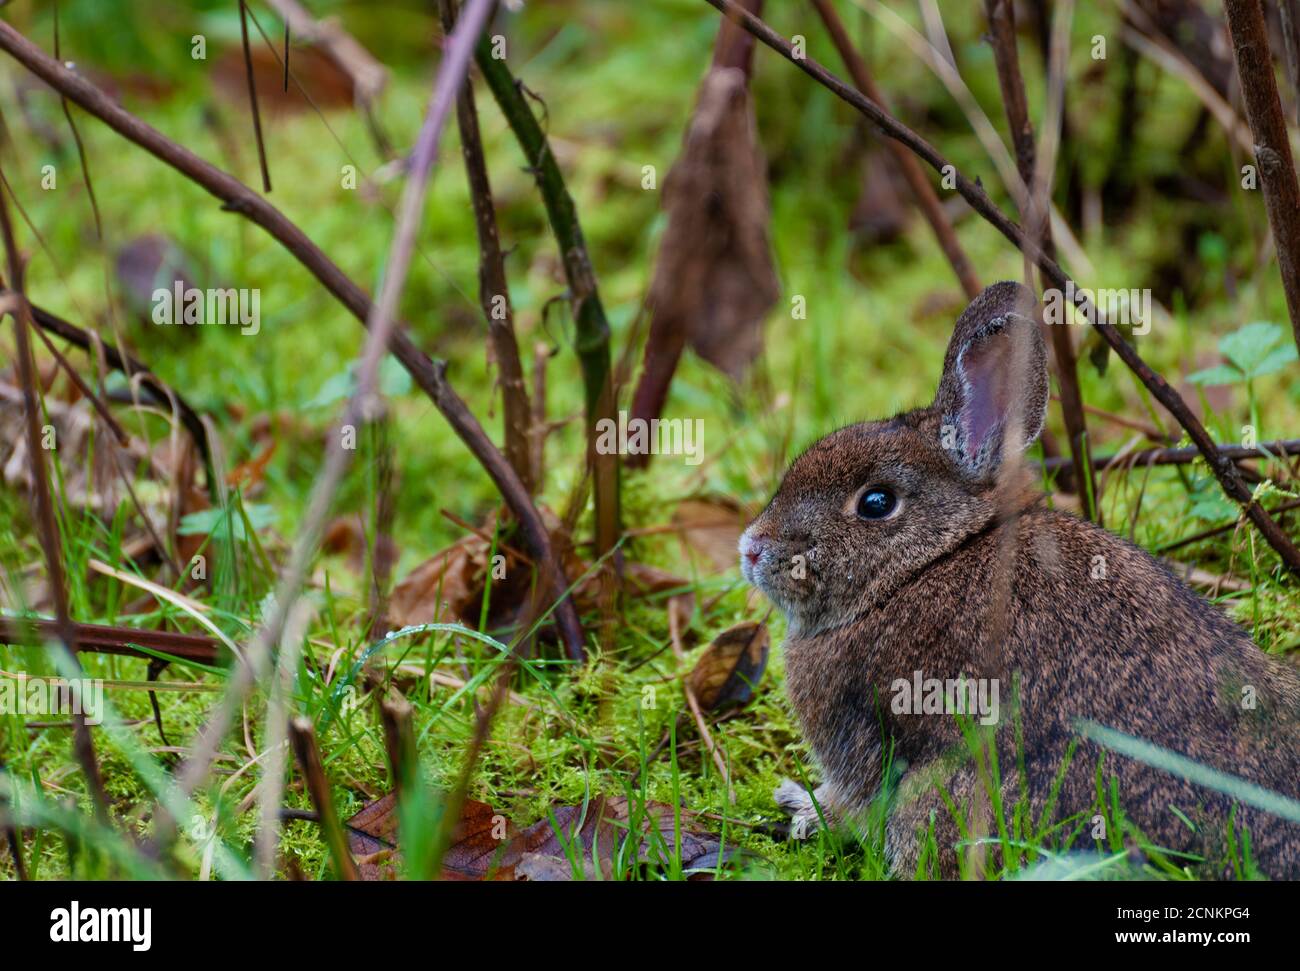 In it's natural habitat, a rabbit sits still on a forest floor so as not to be seen. Stock Photo